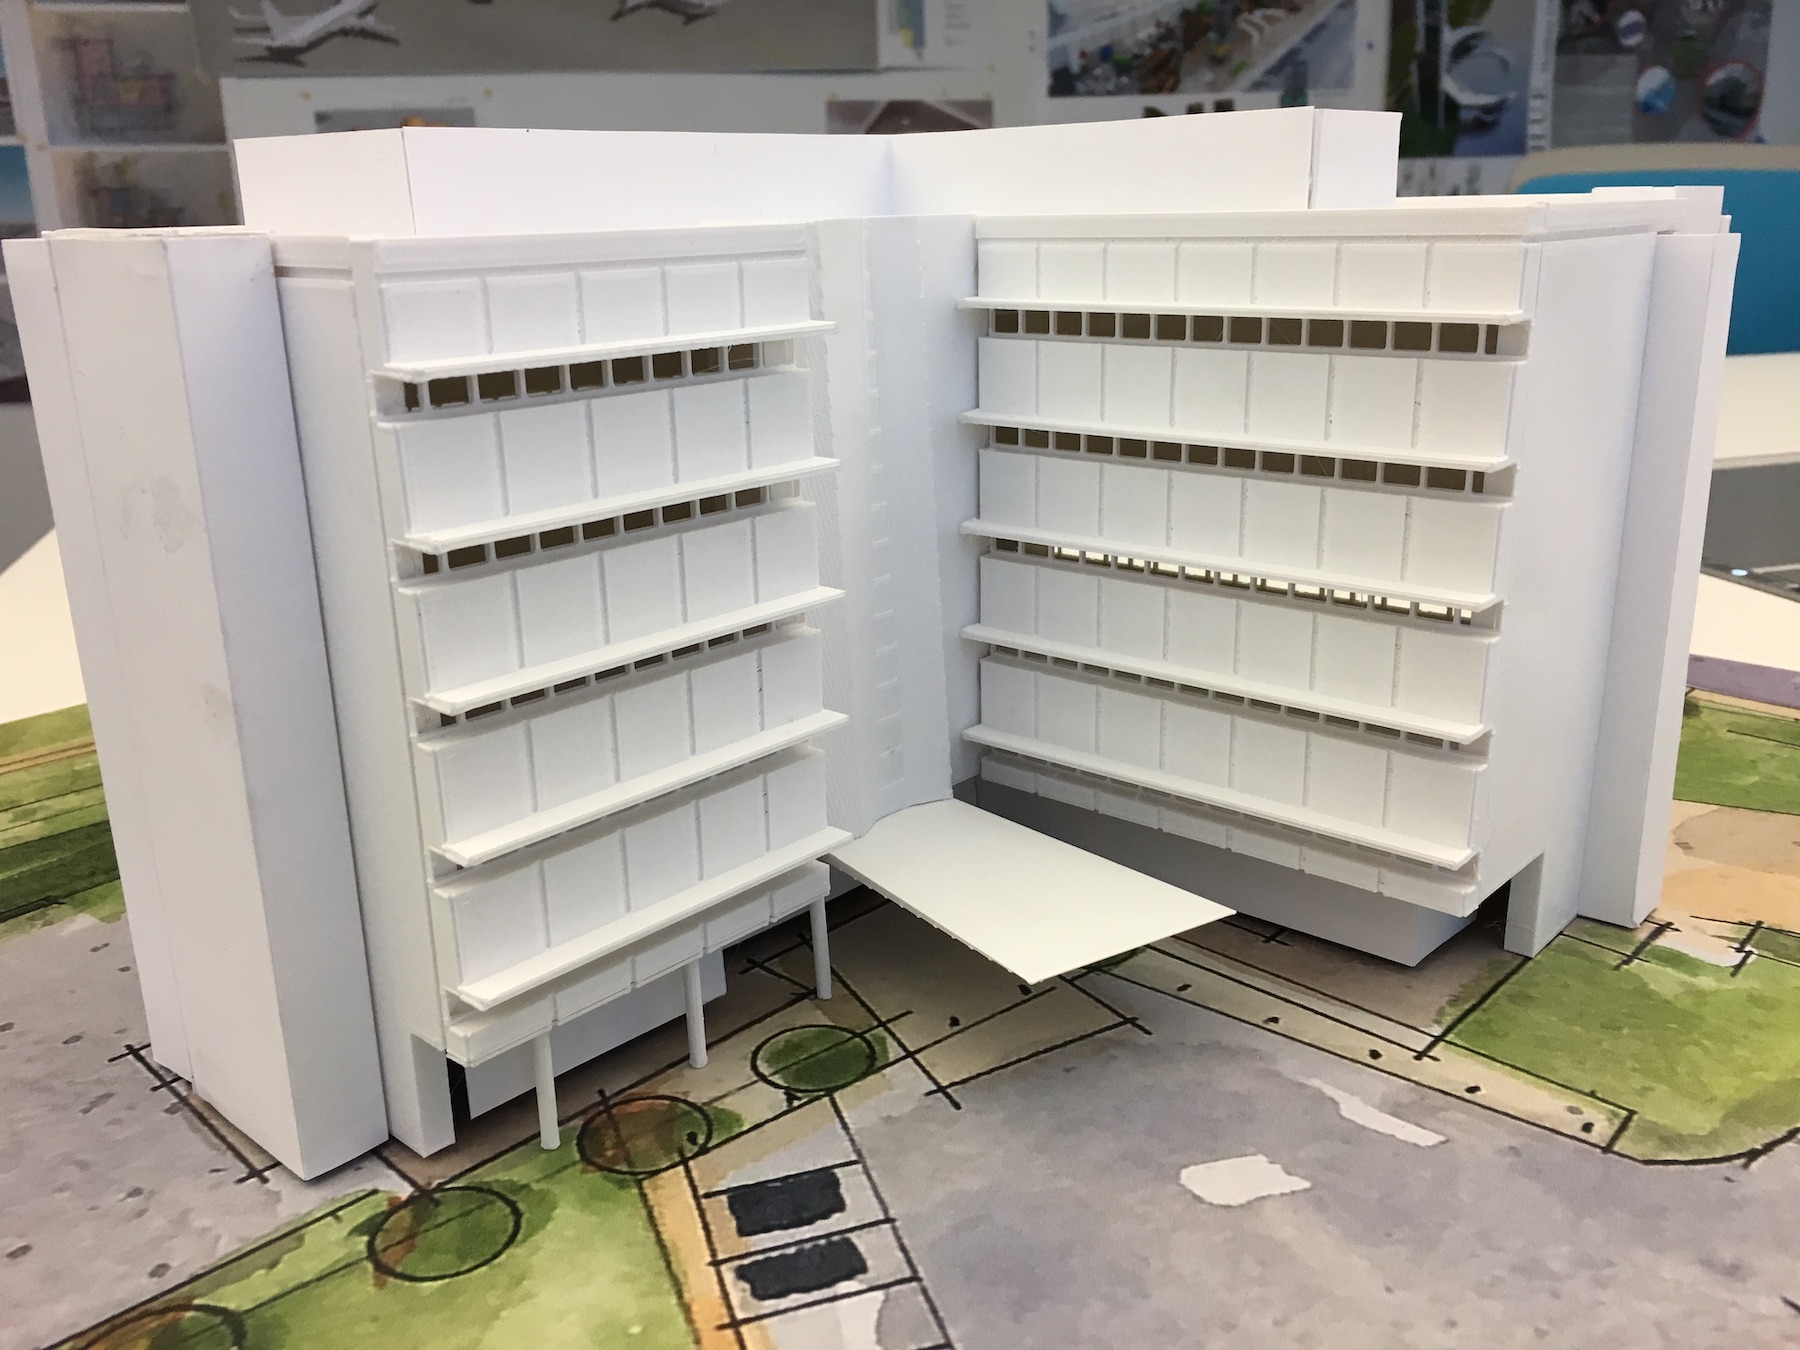 Physical models you hand to your client can immediately create an understanding of the design. 